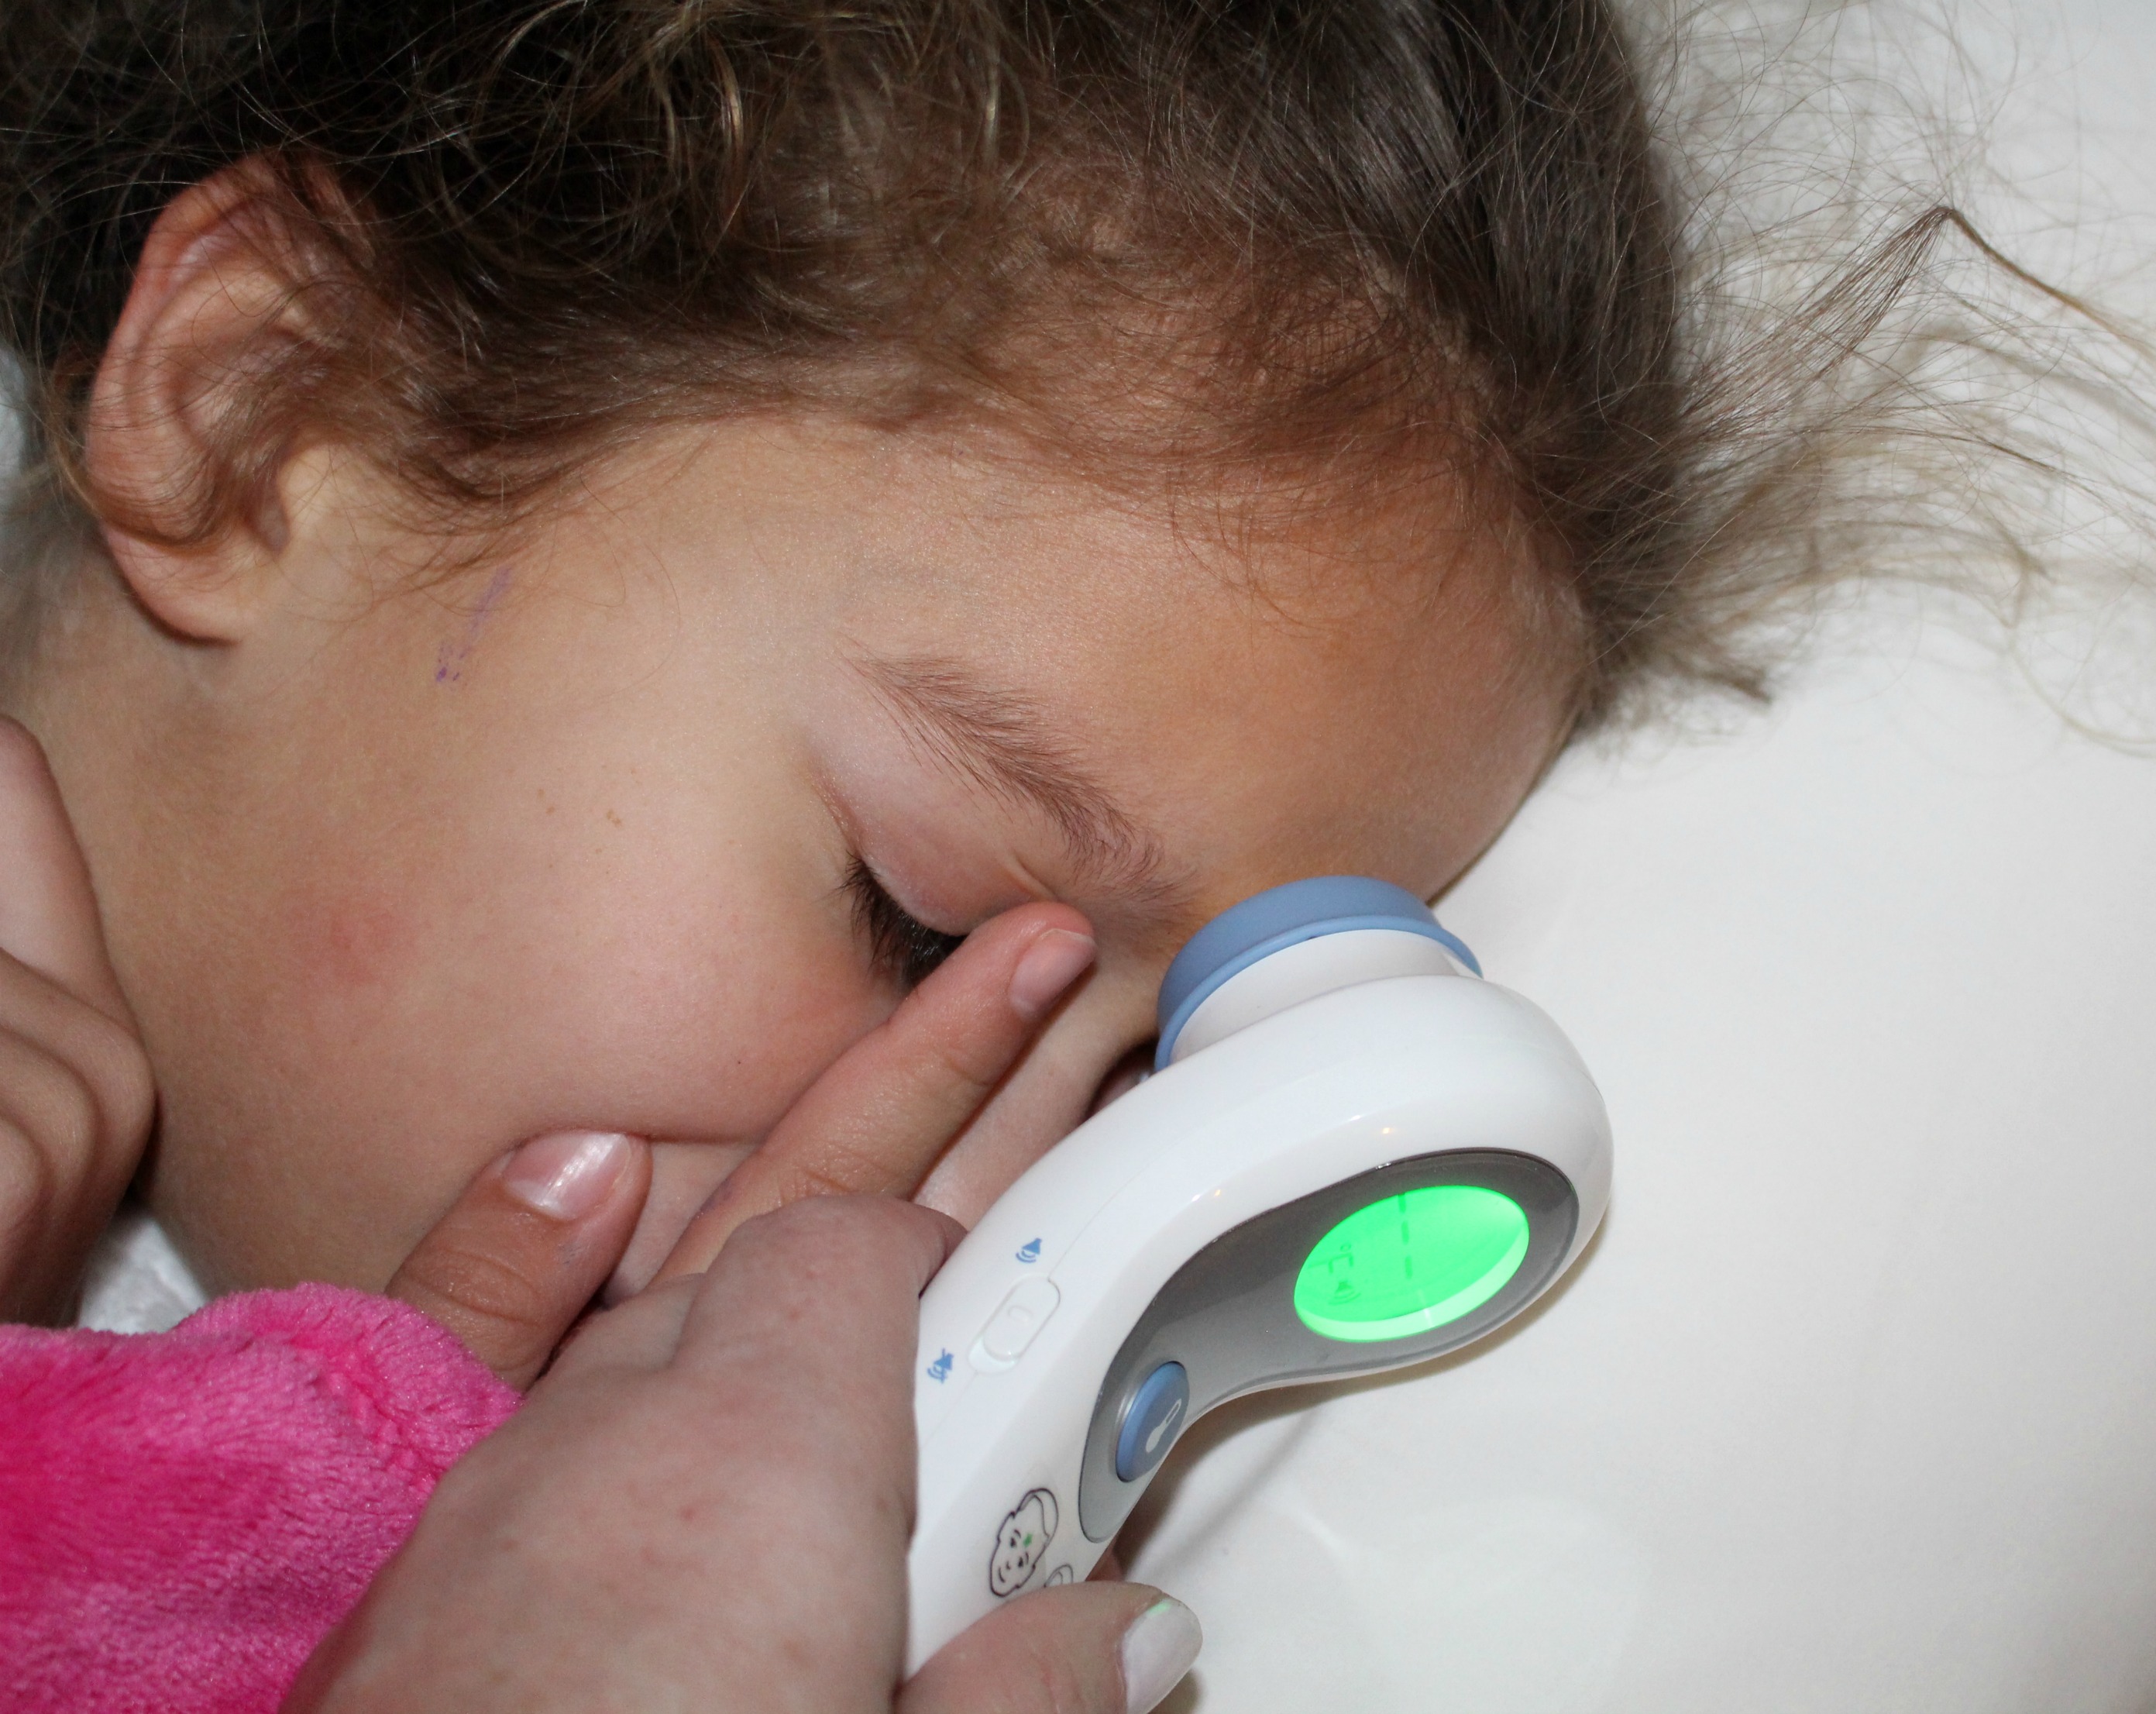 Feel in Control When Your Child Gets a Fever